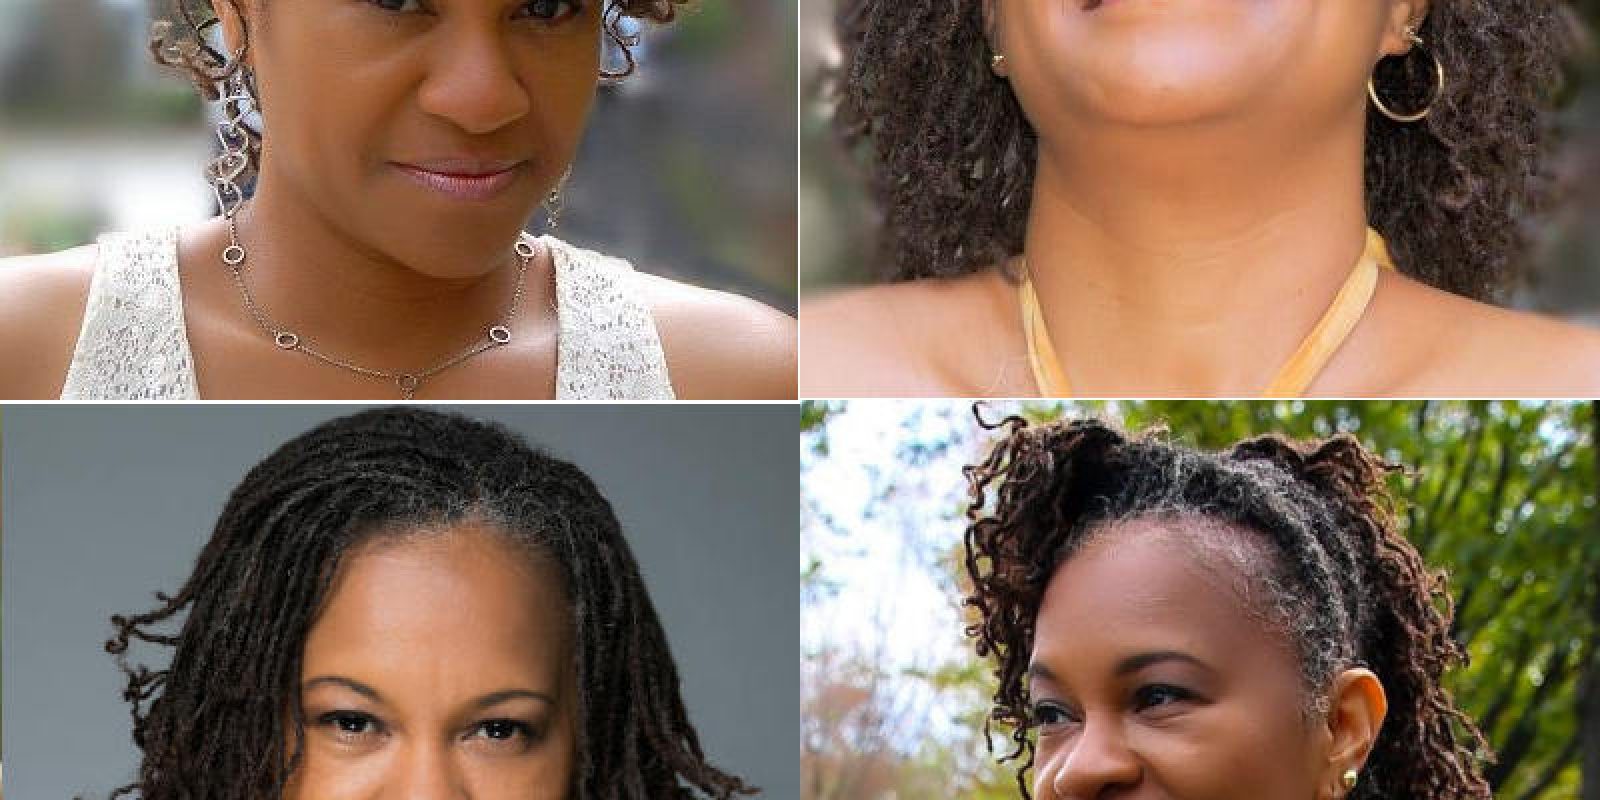 Easy Festive Hairstyles for the Holidays - Locs Styles, Loctitians, Natural  Hairstylists, Braiders & hair care for Locs and naturals.